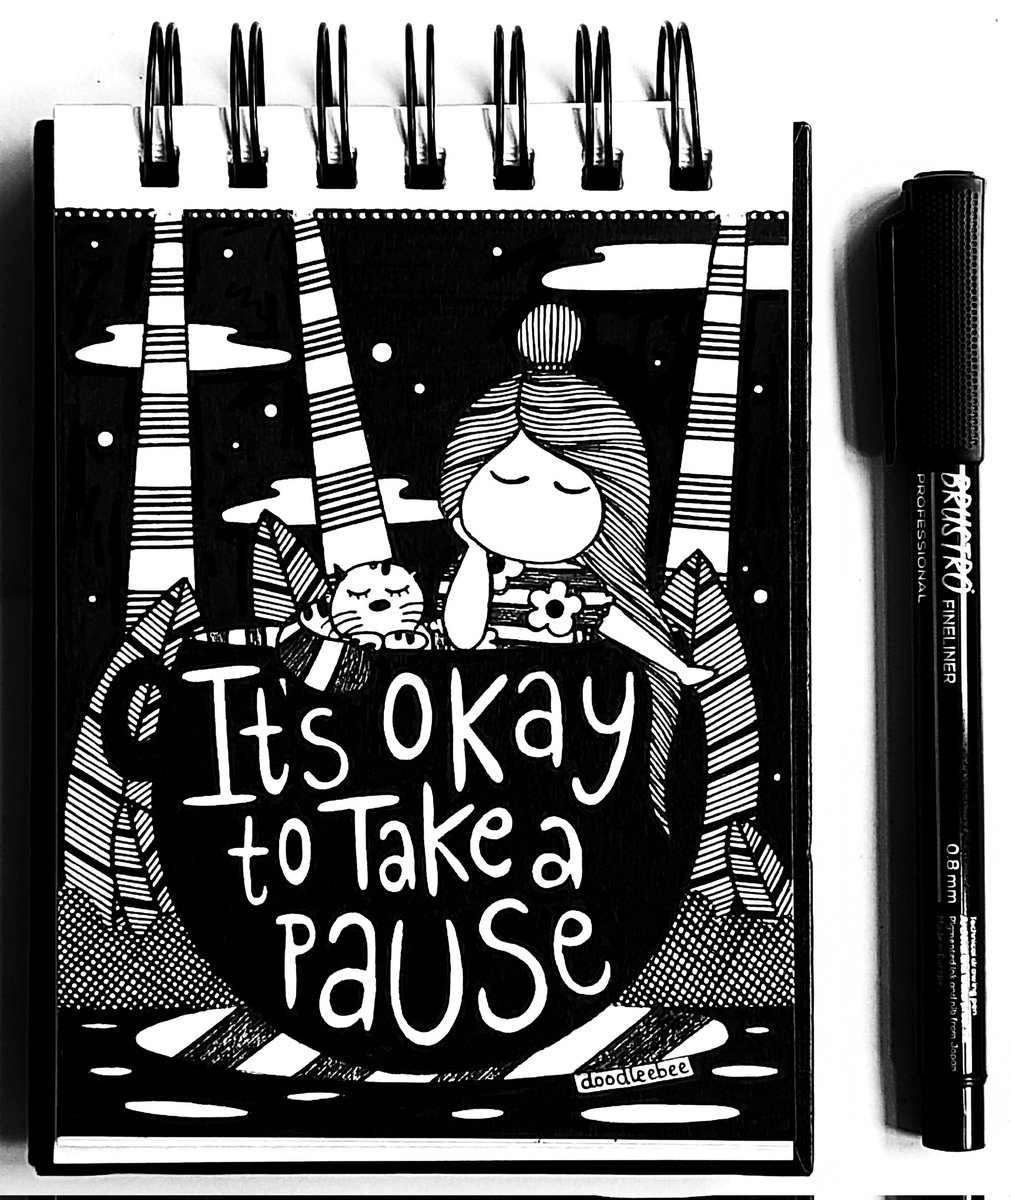 It's okay to take a pause, especially when you're not feeling it. If it all gets too overwhelming, just be. It will pass. You're not alone ♡
#Doodleebee #mentalhealth #selfcare #art #doodle #caturday #WeekendVibes